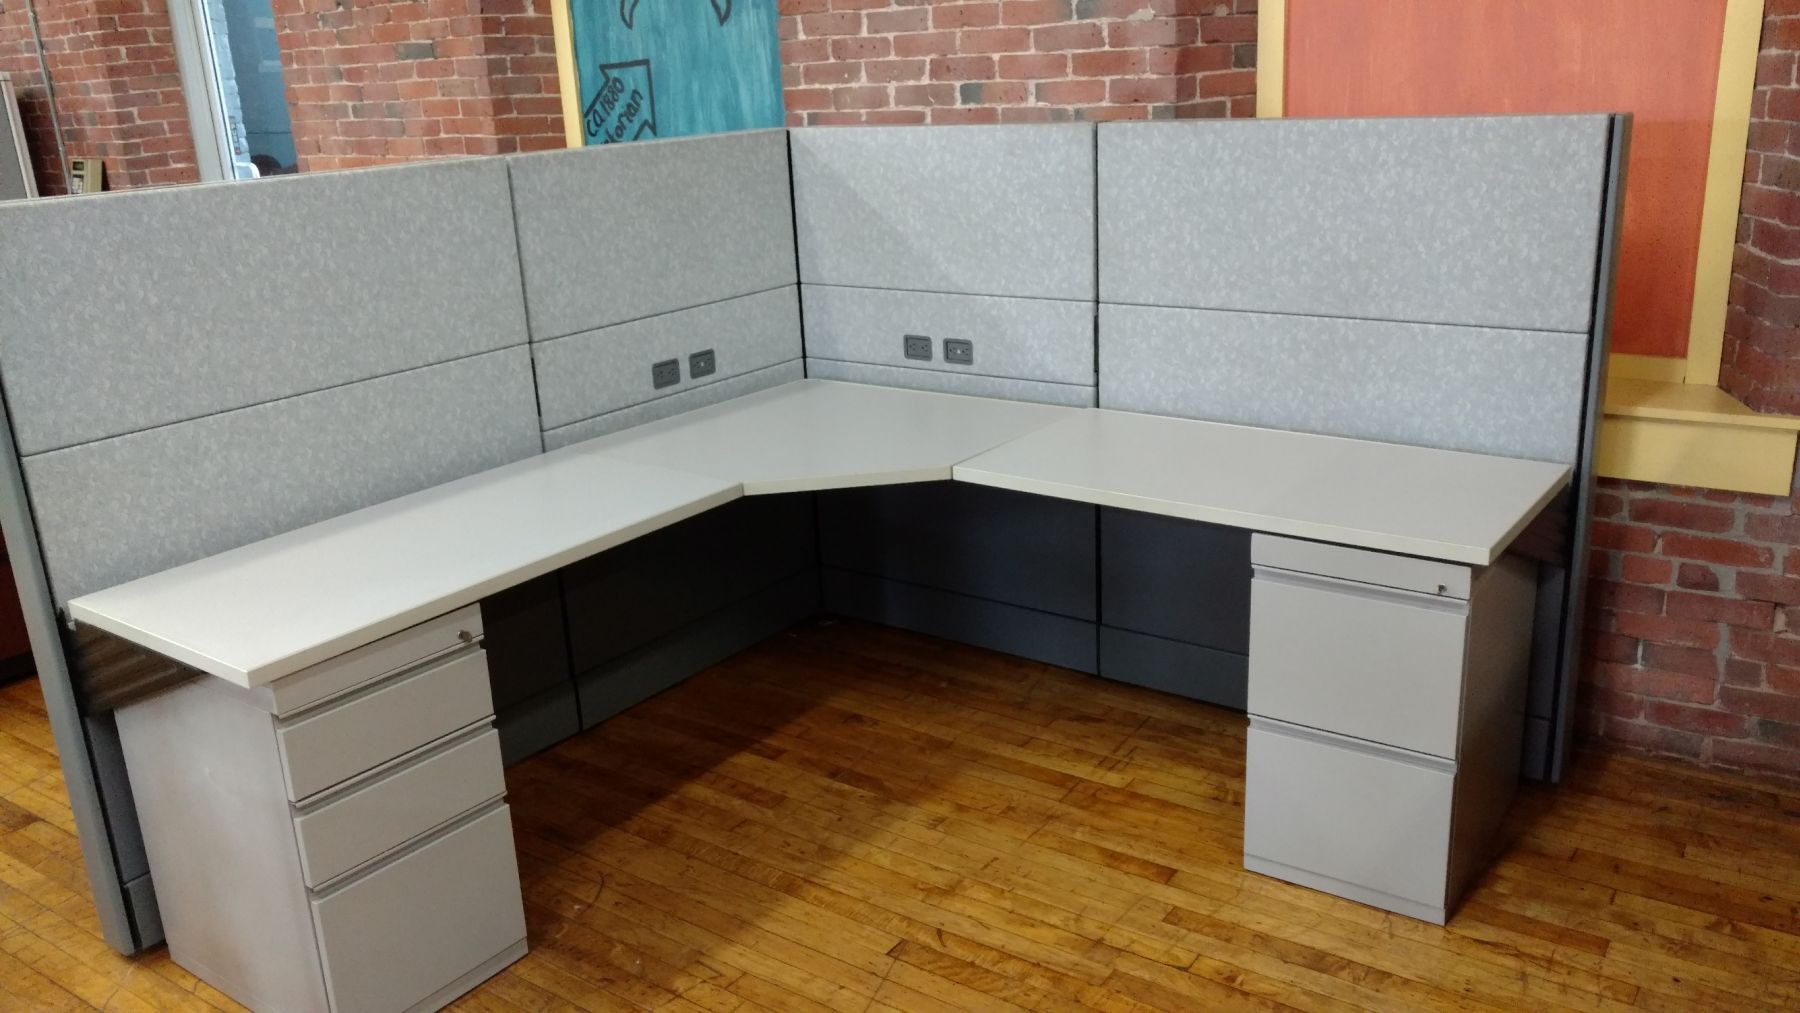 W6071A - Herman Miller Ethospace Cubicles